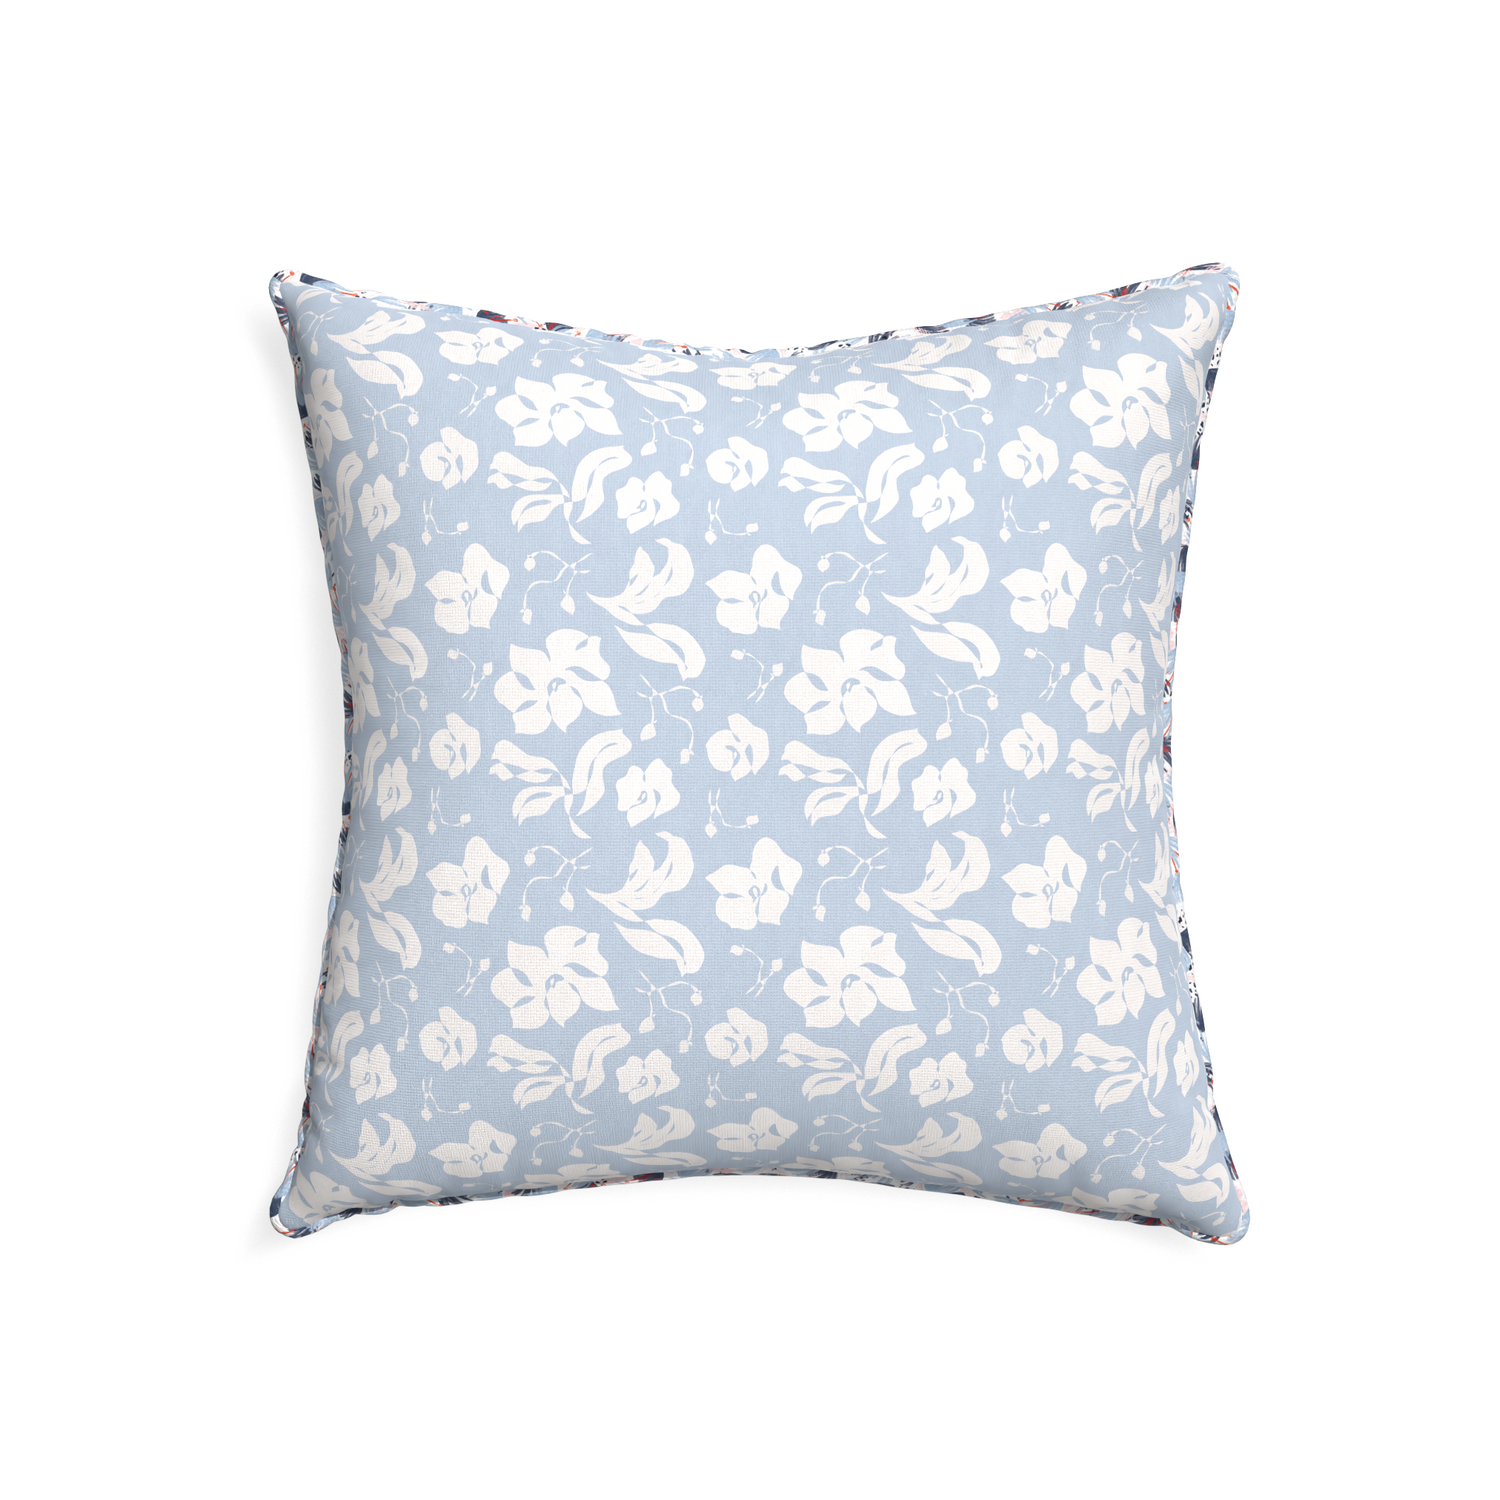 22-square georgia custom pillow with e piping on white background